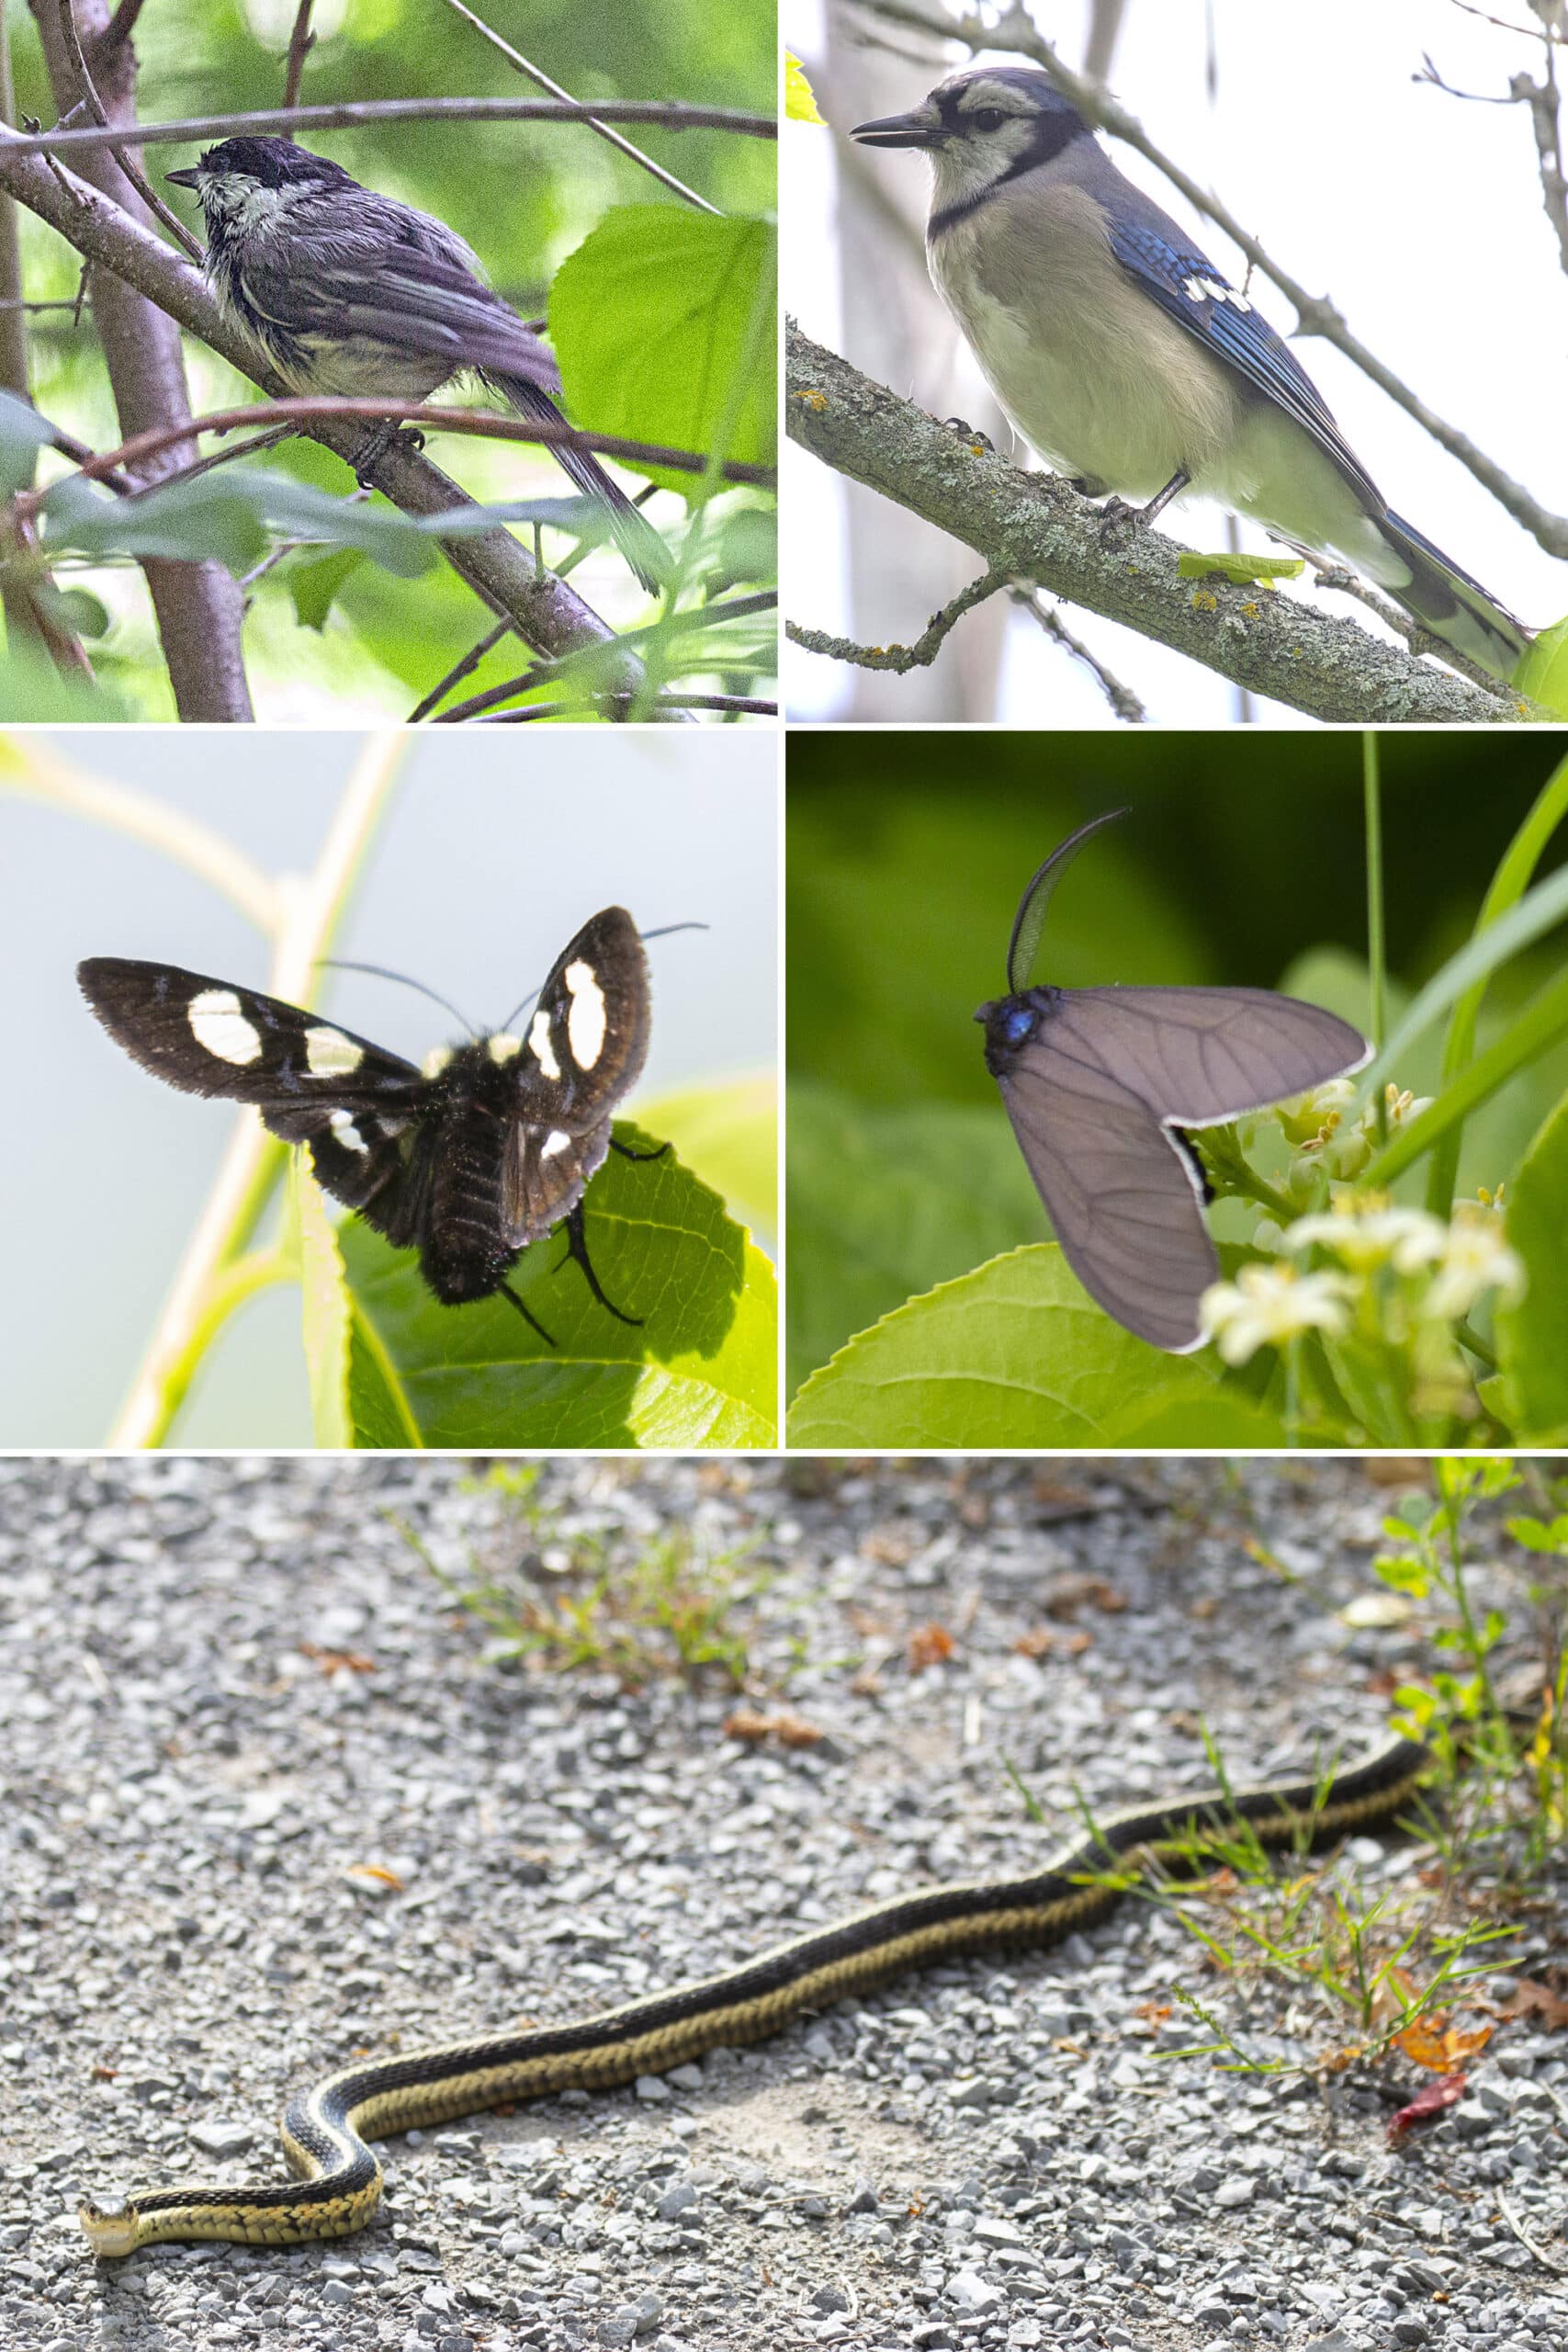 5 part image showing birds, moths, and a snake.